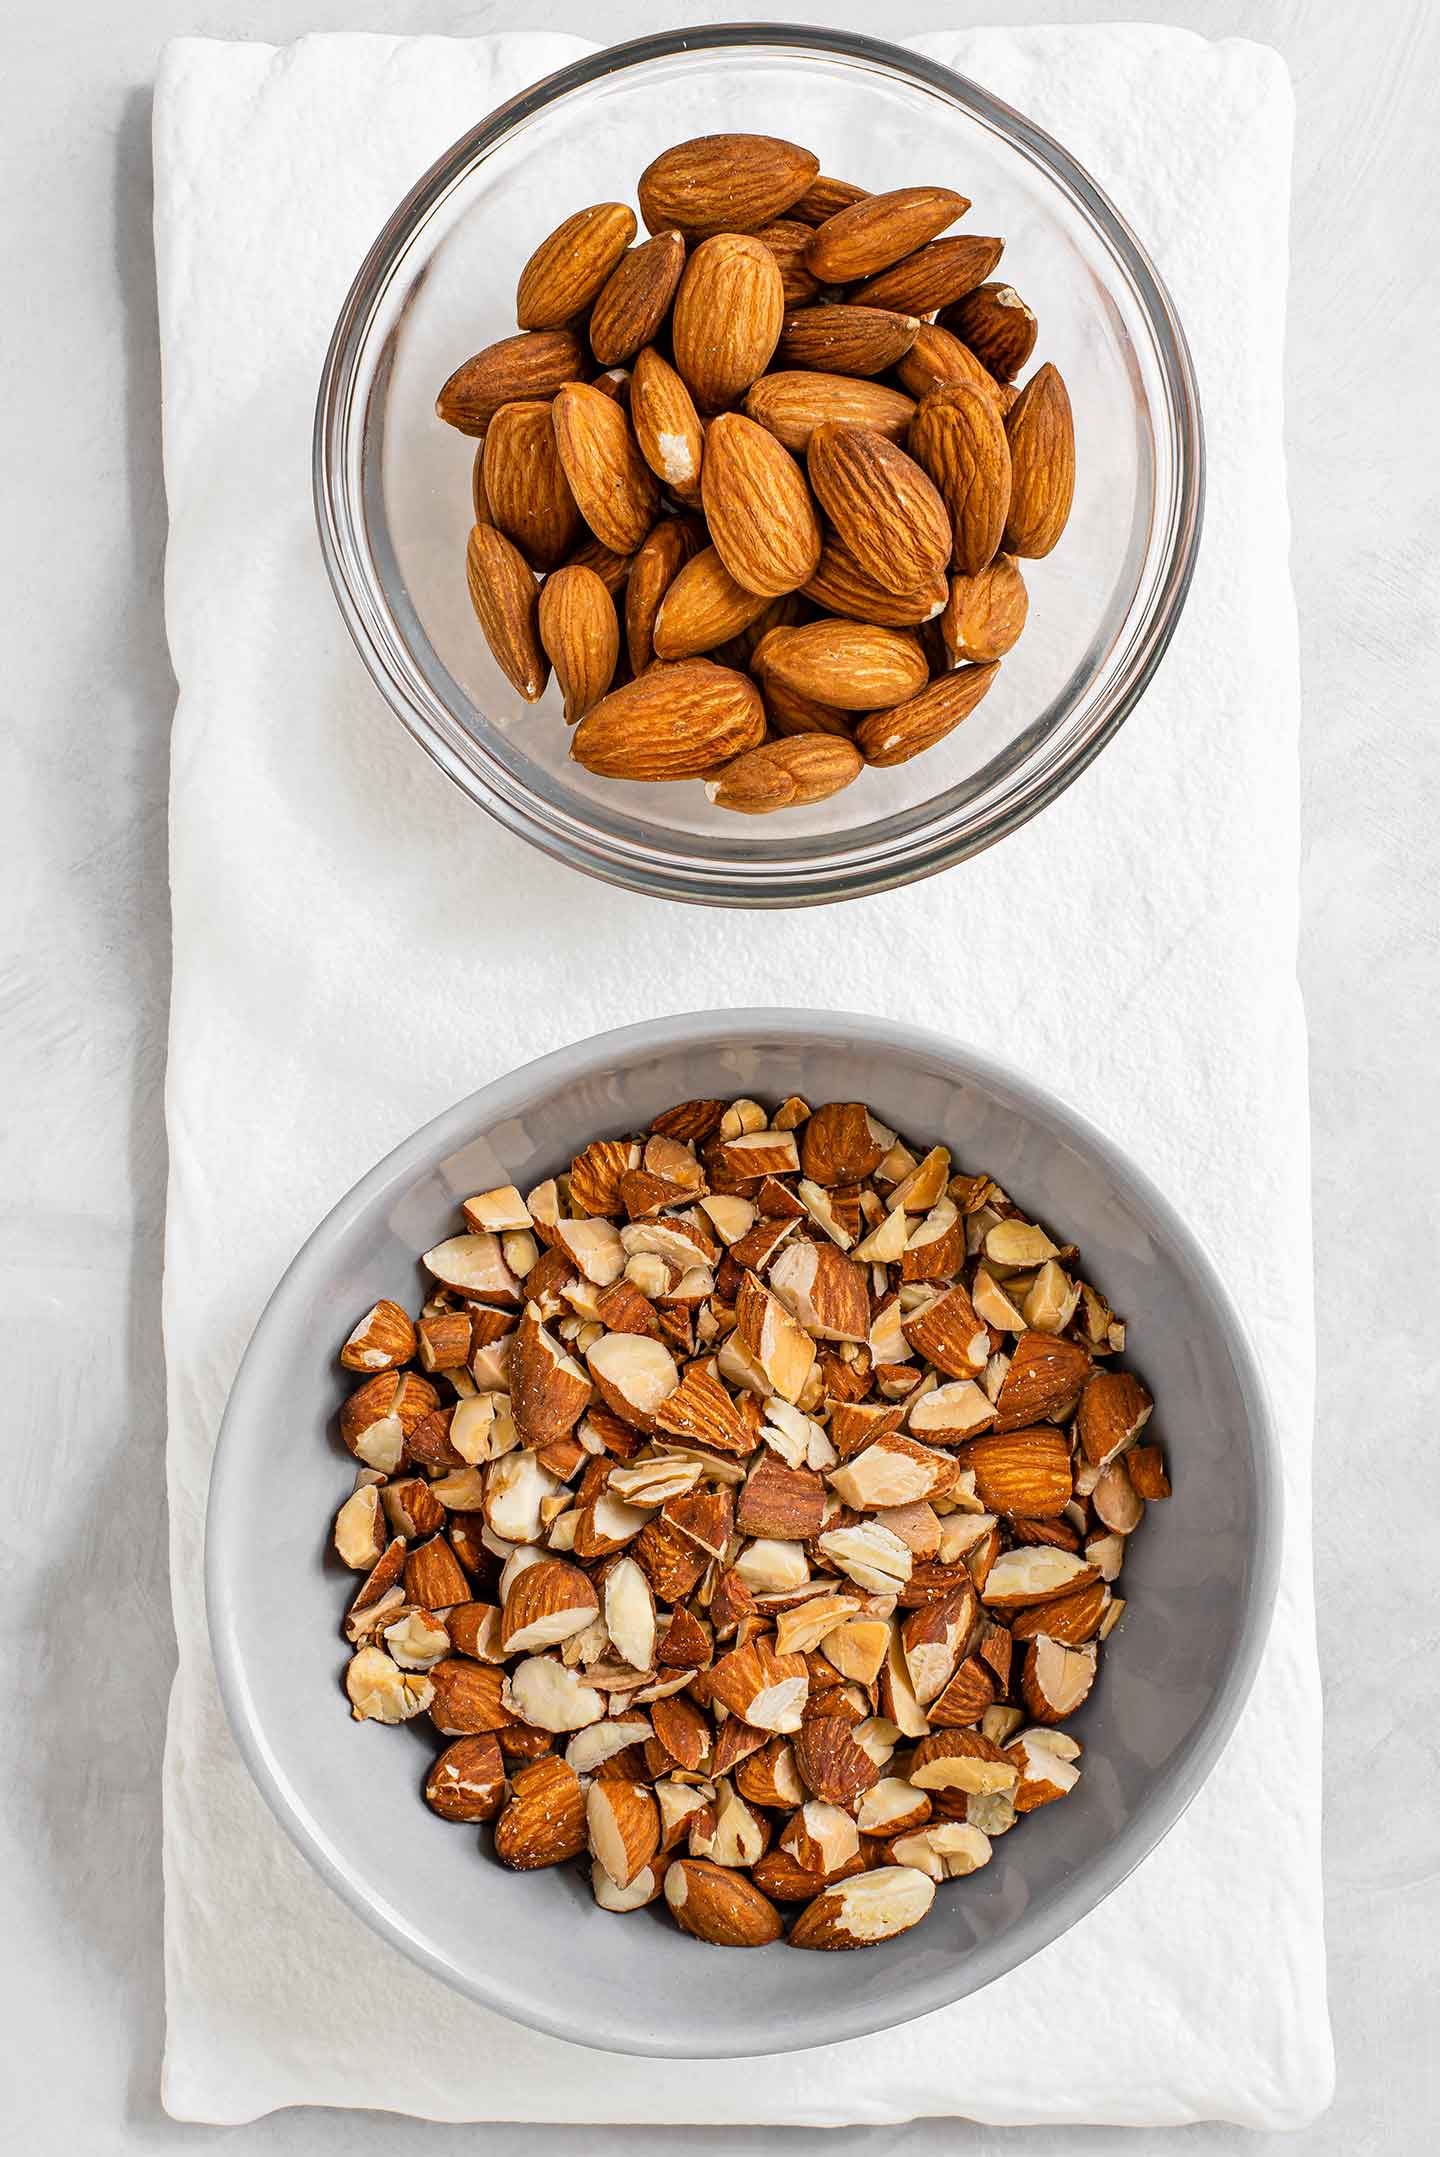 Top down view of two small dishes. In one dish are whole almonds and in the other dish, the almonds are coarsely chopped and lightly browned from being roasted.